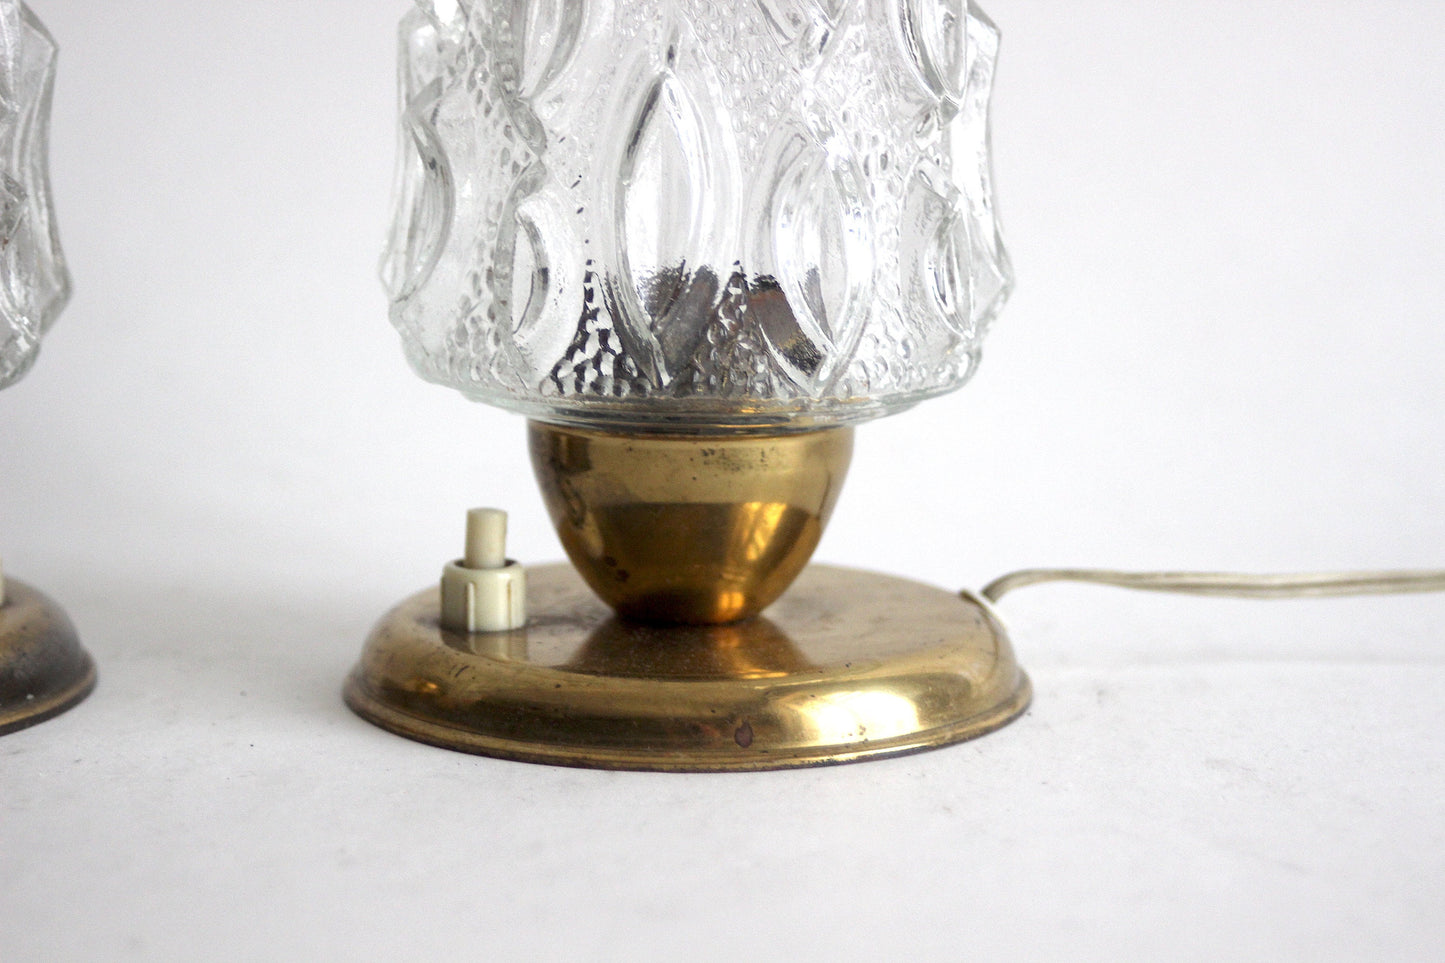 German brass and glass bedside lamp 1950s. Mid-century style.